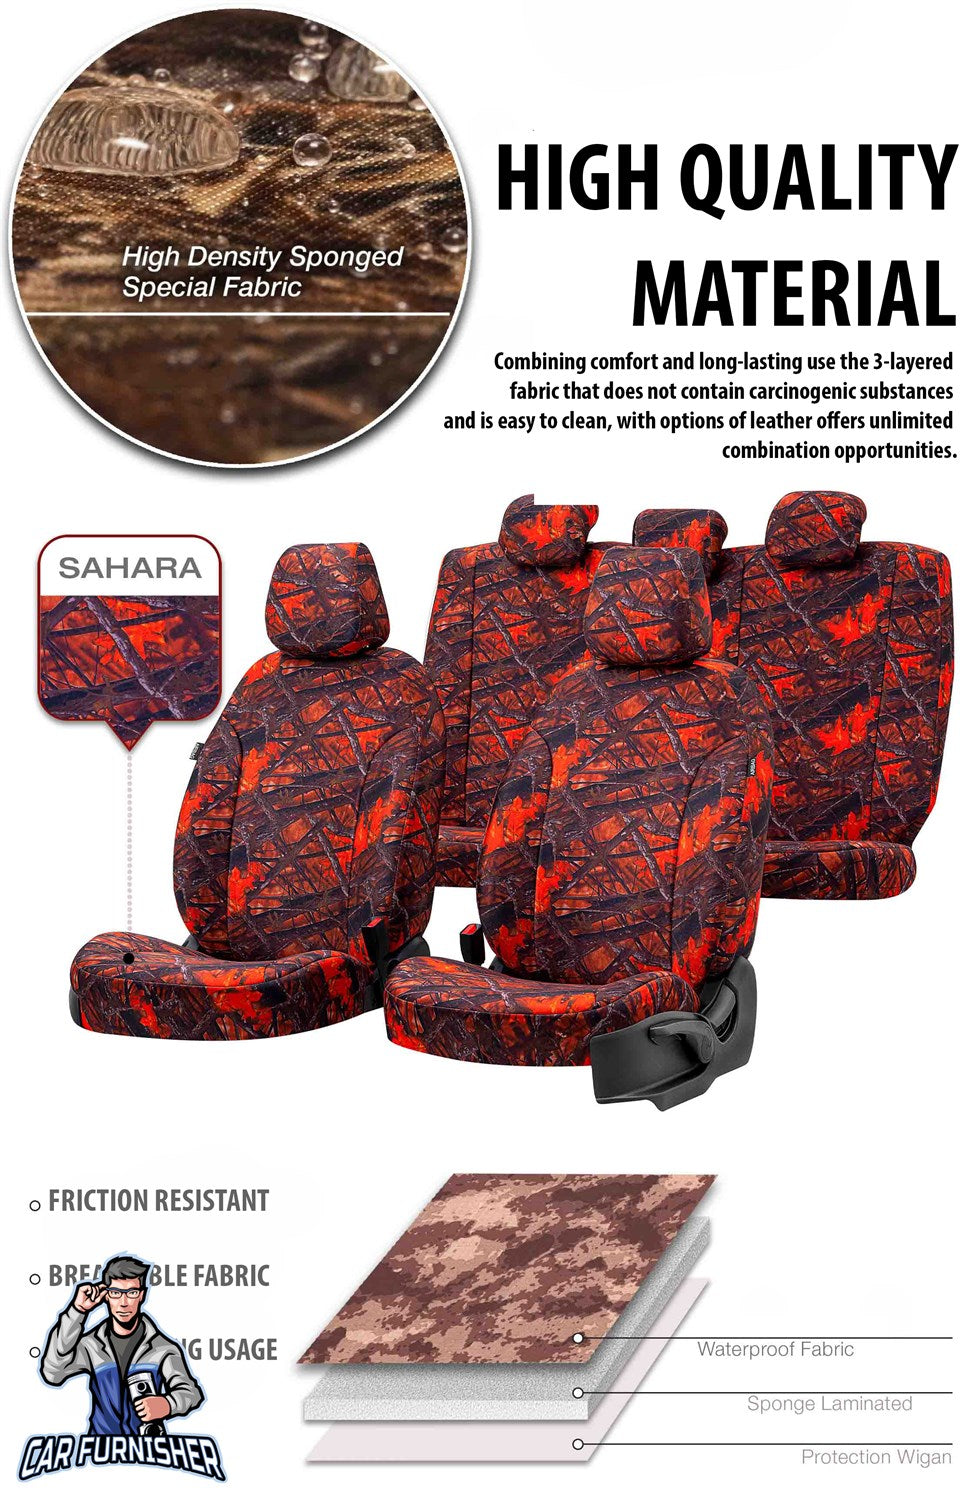 Audi Q7 Seat Cover Camouflage Waterproof Design Montblanc Camo Waterproof Fabric